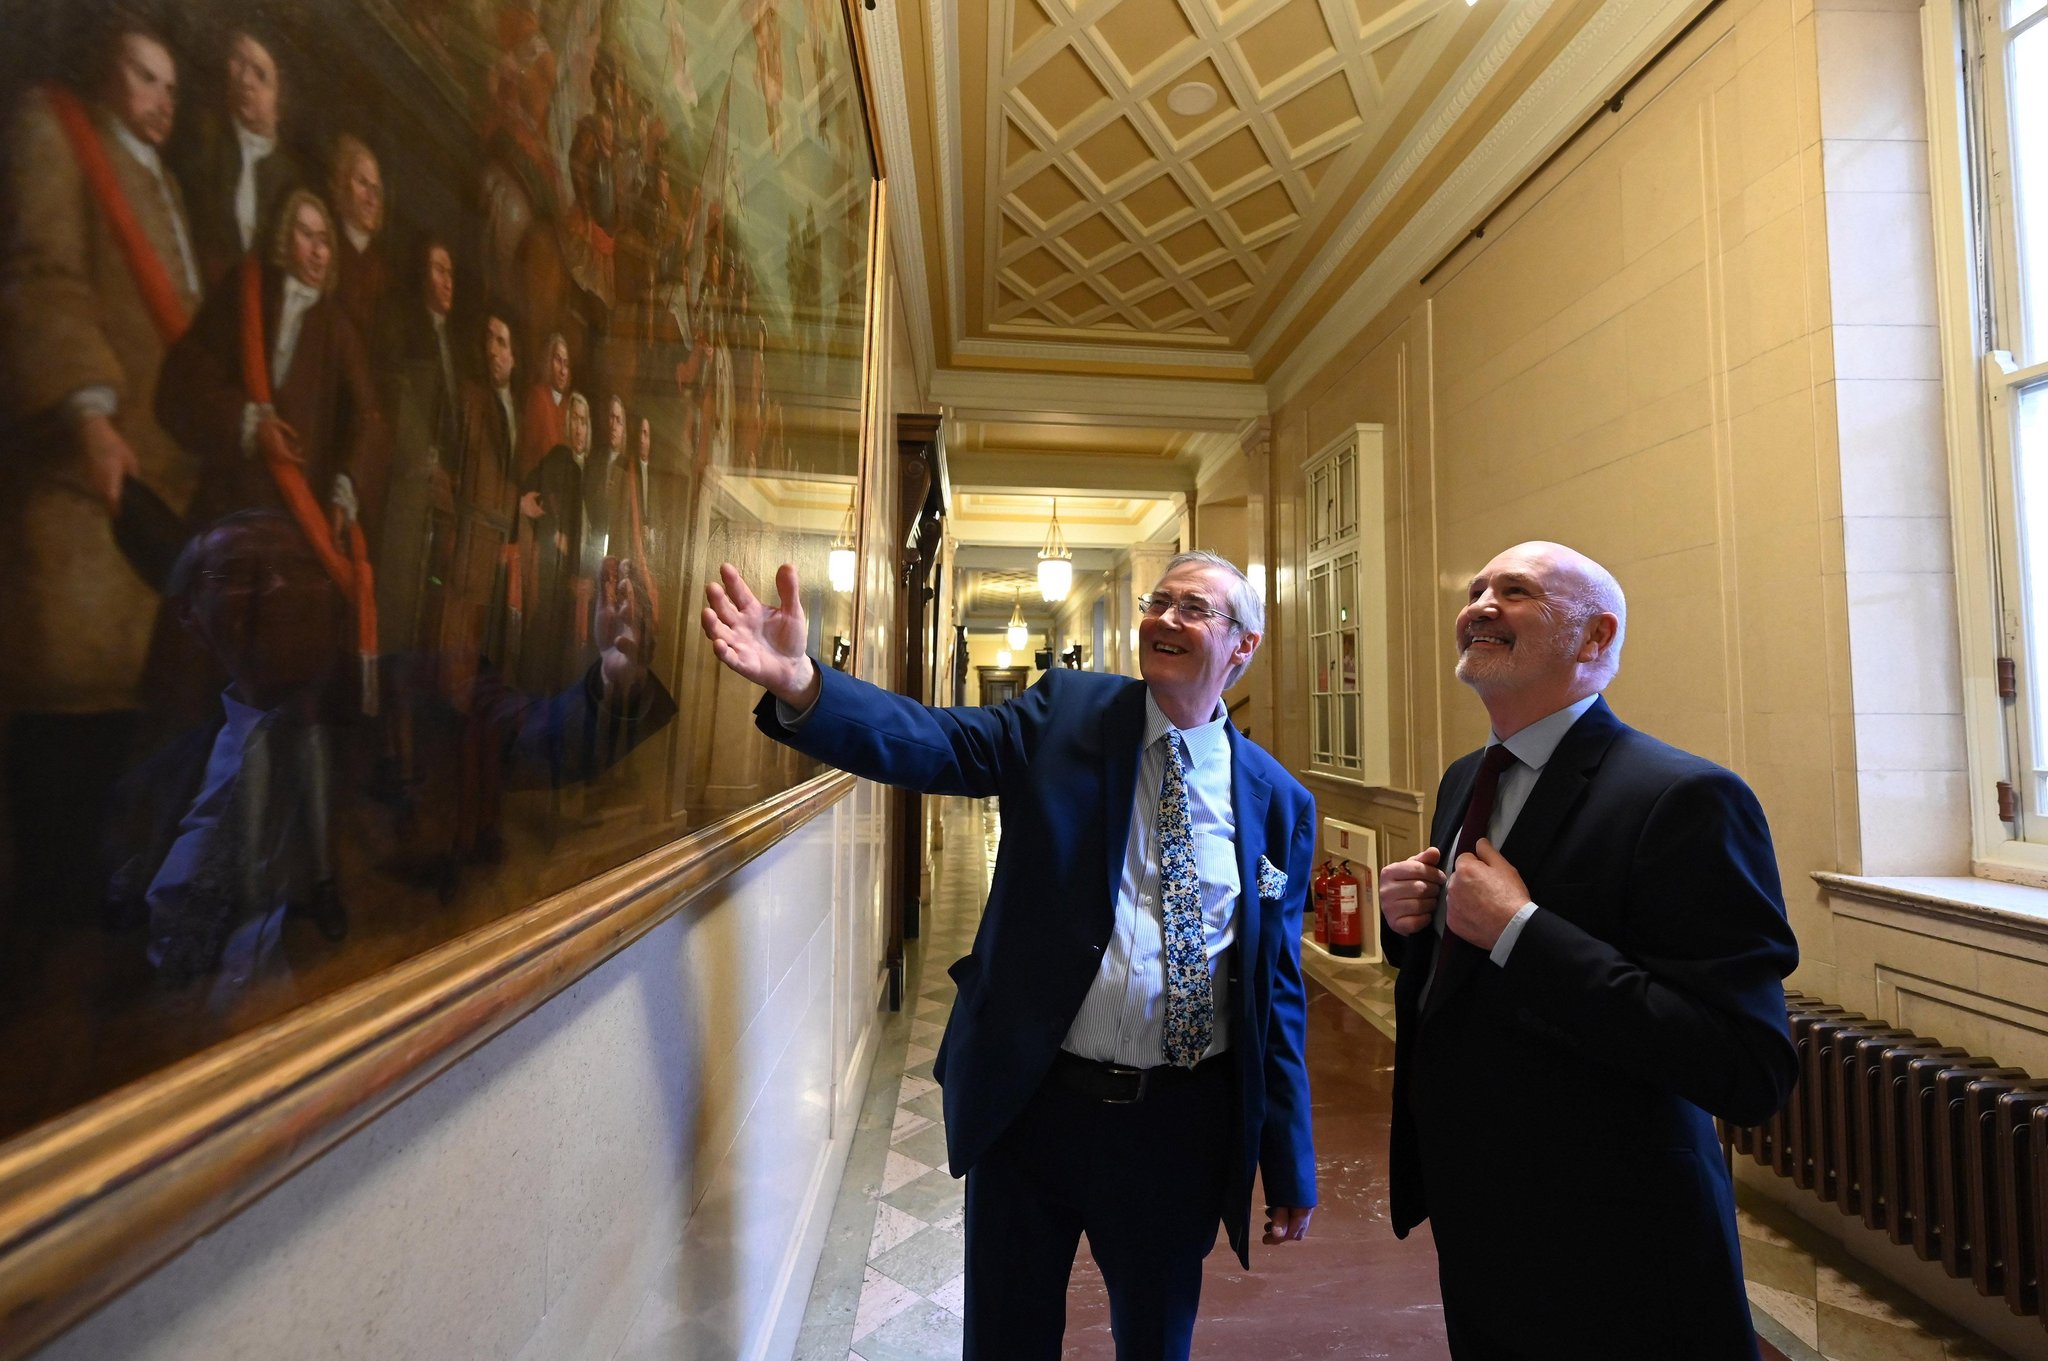 Portraits of de Valera and Collins back on show at Stormont but where is the Queen?